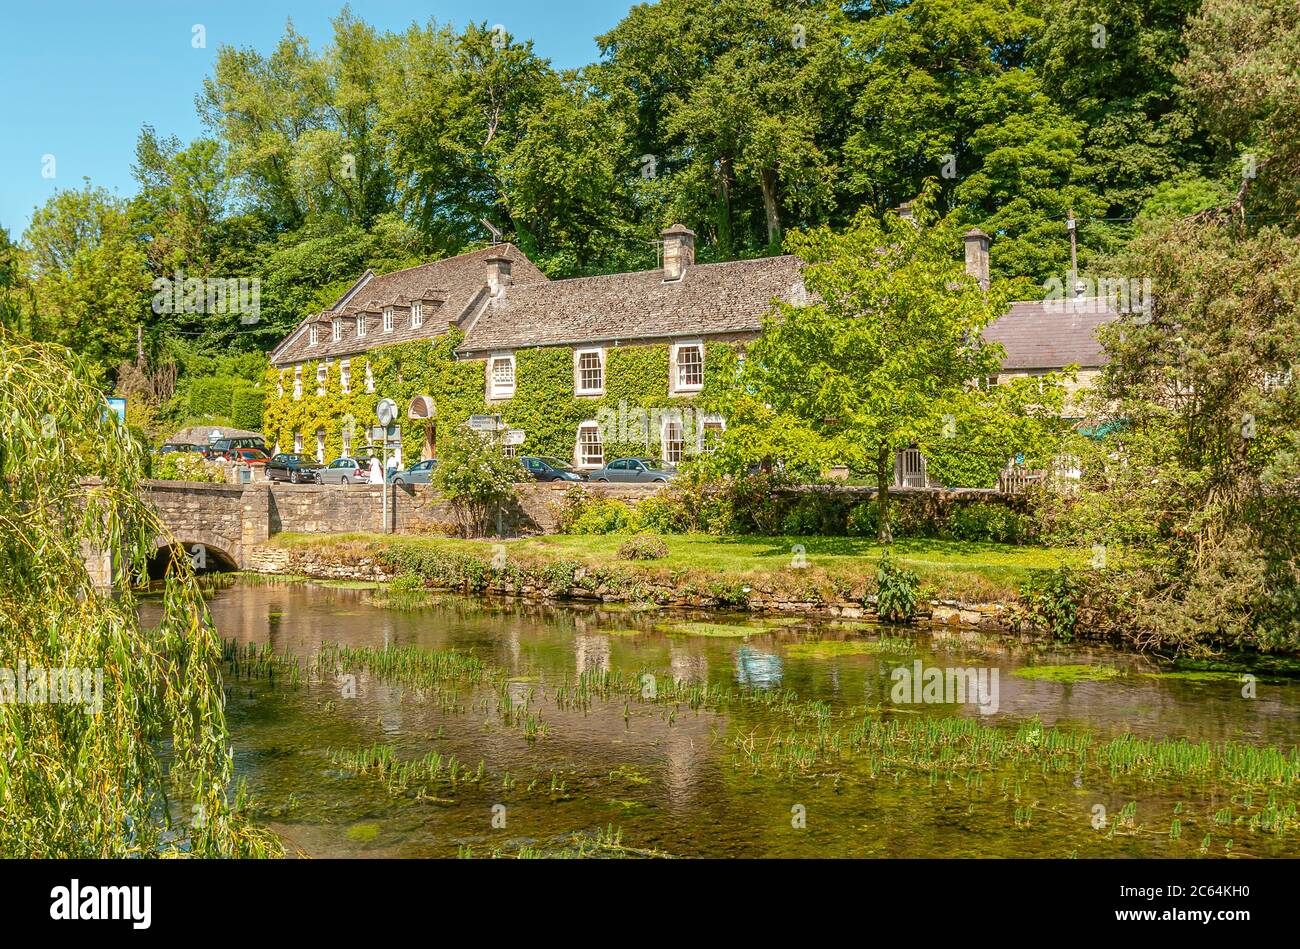 I tradizionali cottage Weaver Cotswolds a River Coln a Bibury, Gloucestershire, Inghilterra Foto Stock